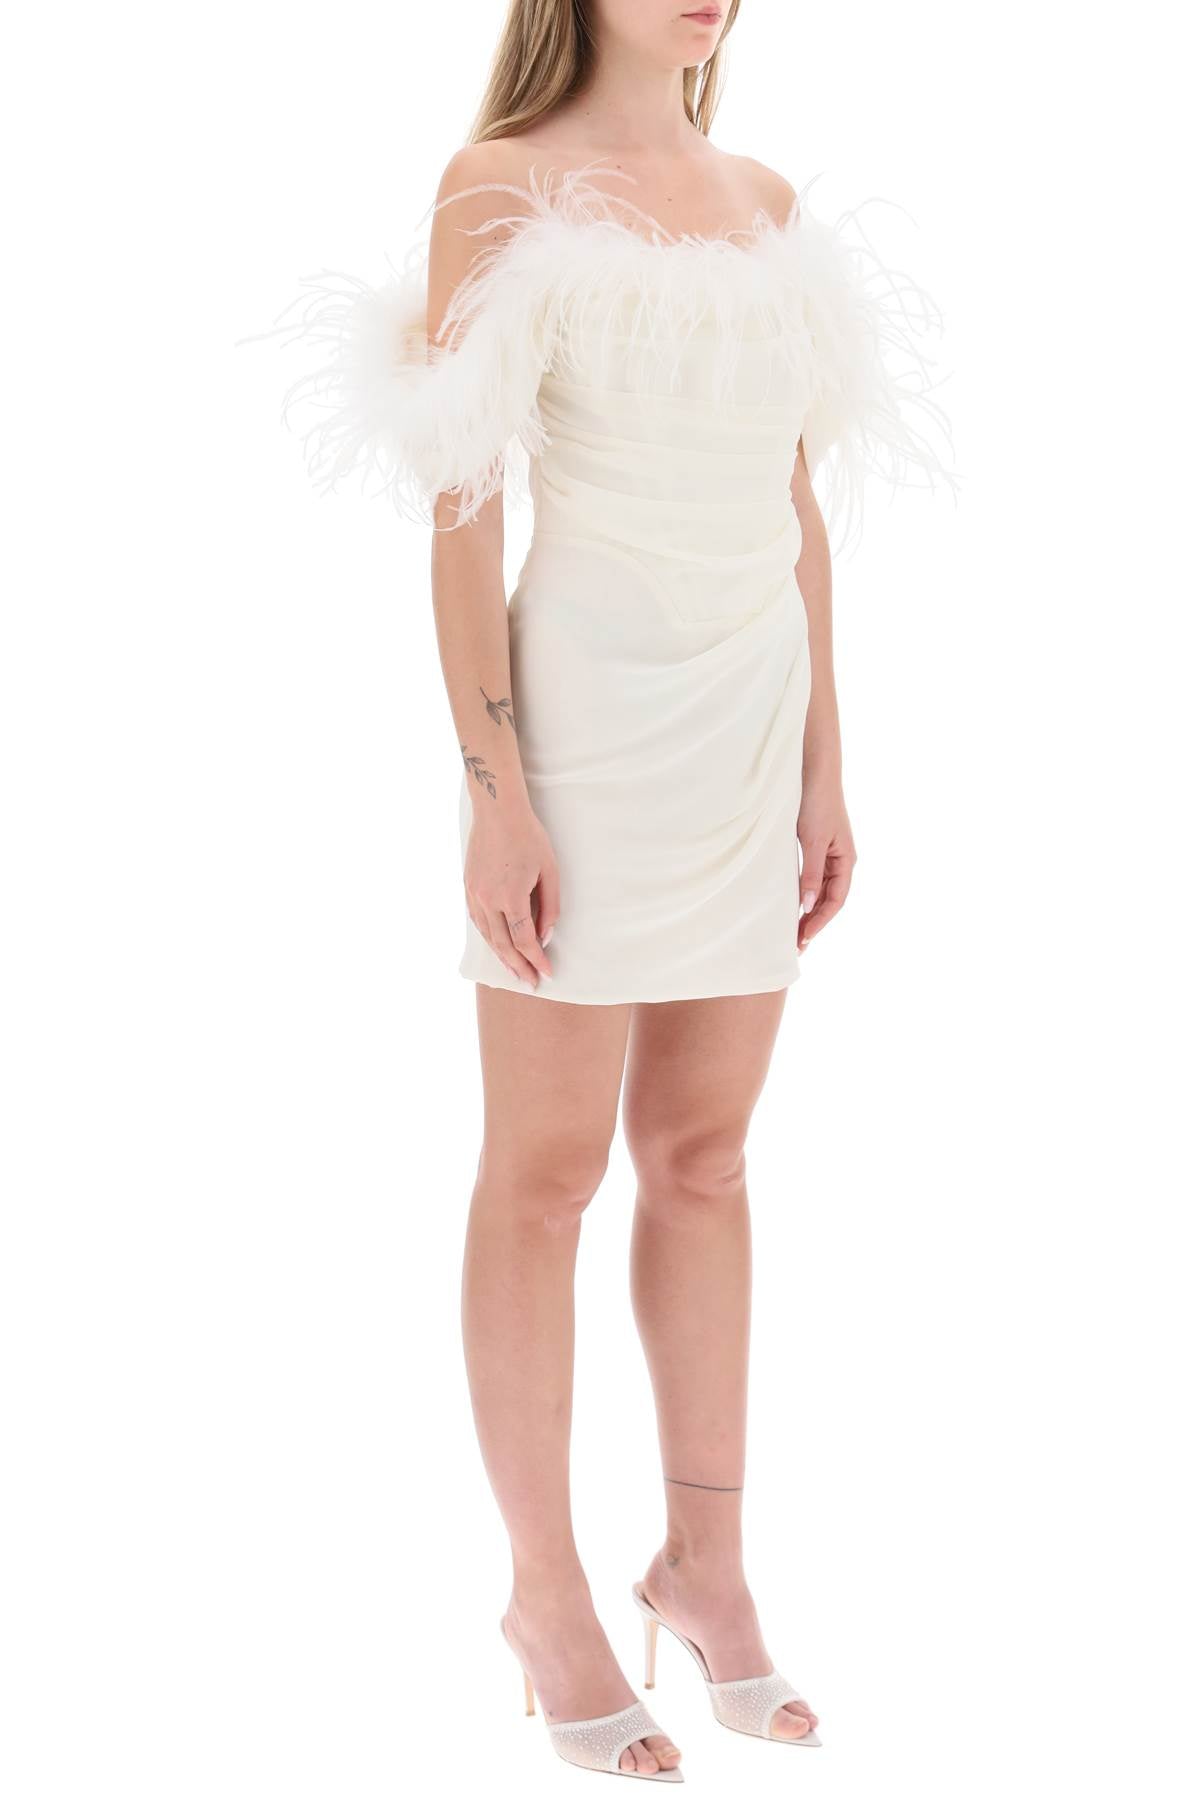 GIUSEPPE DI MORABITO Off-Shoulder Ostrich Feather Mini Dress for Women in White - SS23 Collection